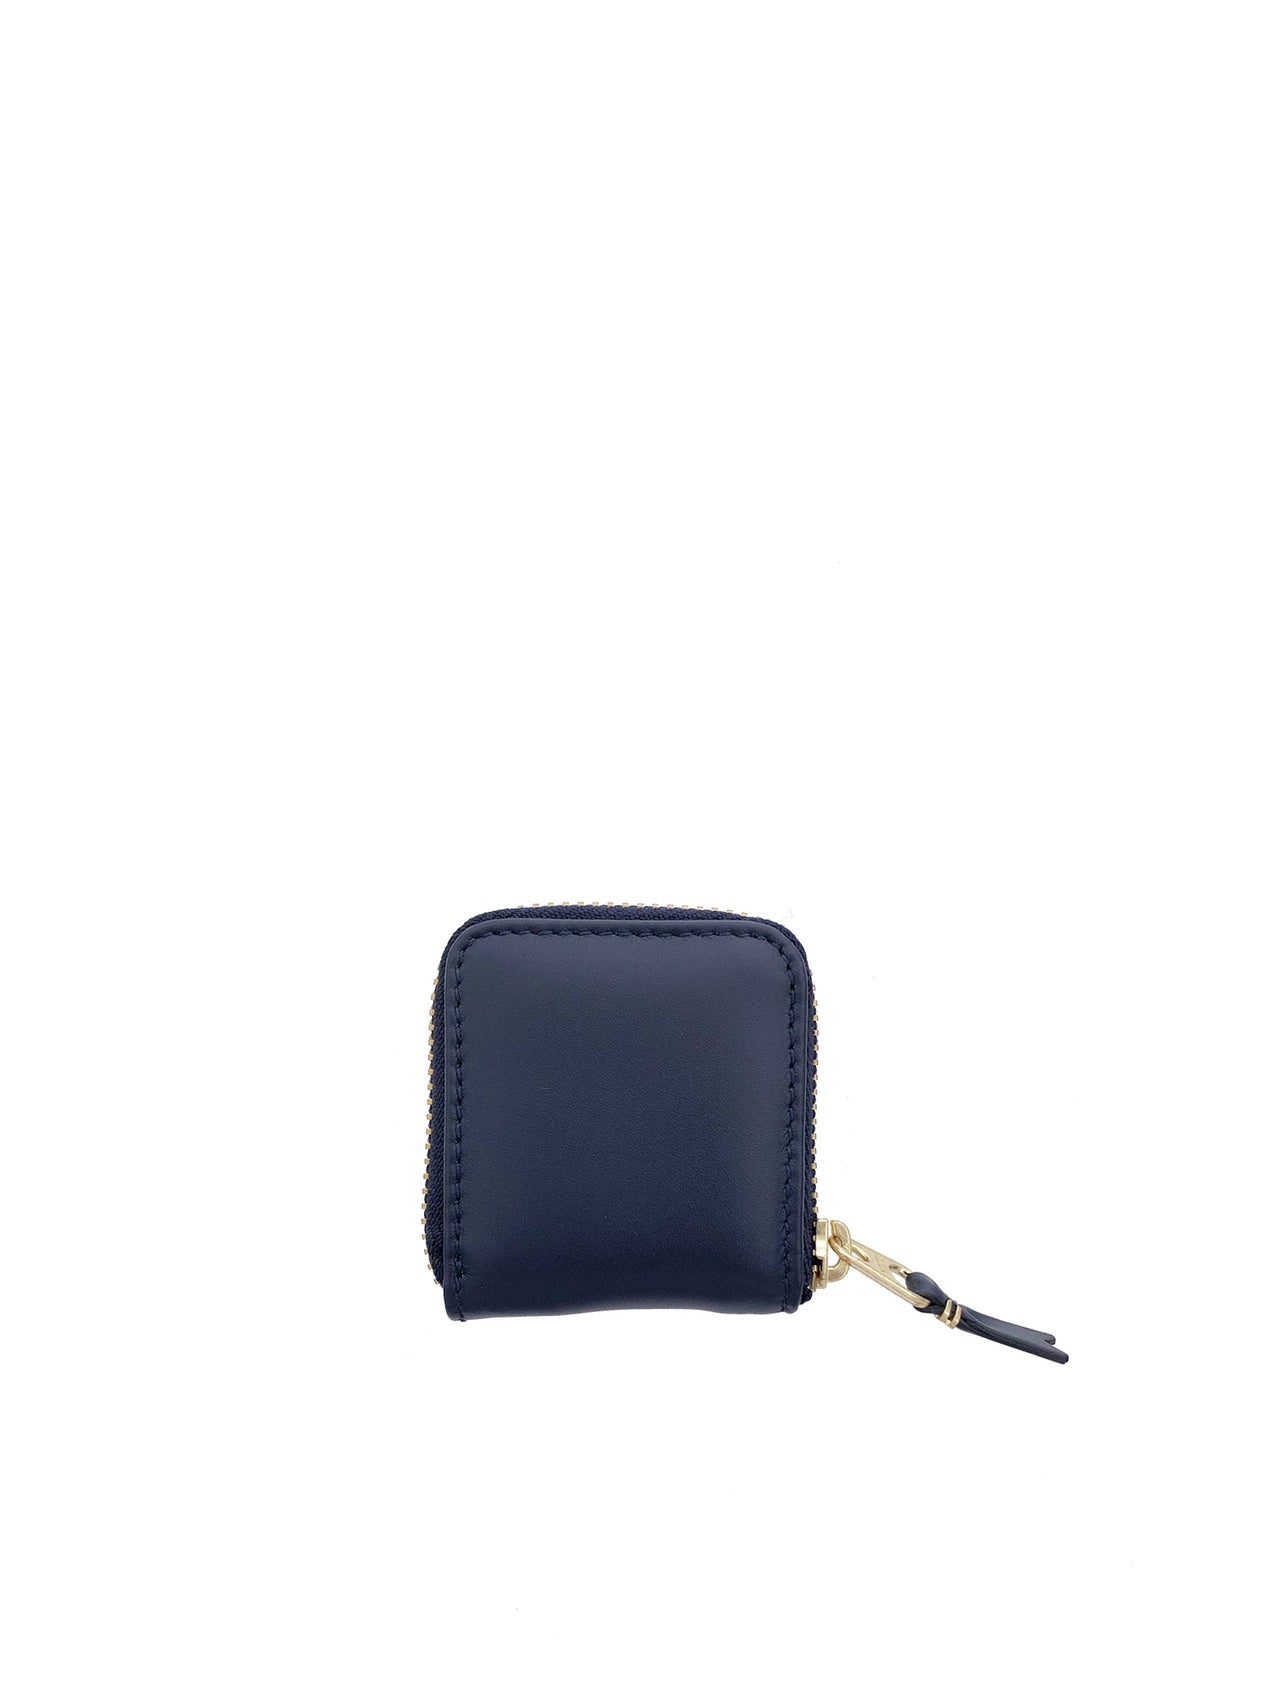 CdG Wallet / CLASSIC LEATHER COIN CASE (NAVY)